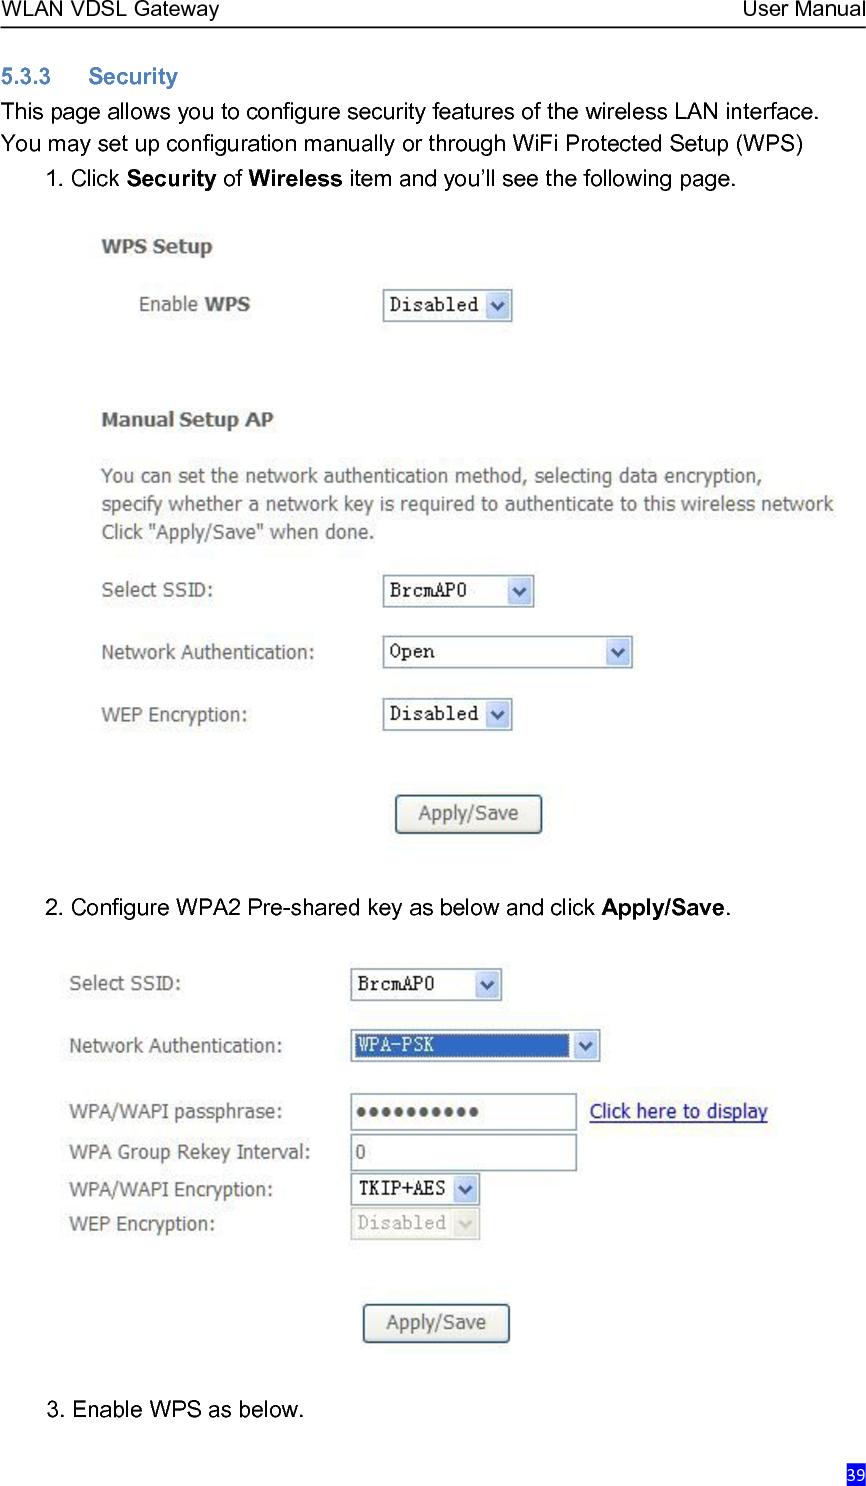 WLAN VDSL Gateway User Manual395.3.3 SecurityThis page allows you to configure security features of the wireless LAN interface.You may set up configuration manually or through WiFi Protected Setup (WPS)1. Click Security of Wireless item and you’ll see the following page.2. Configure WPA2 Pre-shared key as below and click Apply/Save.3. Enable WPS as below.